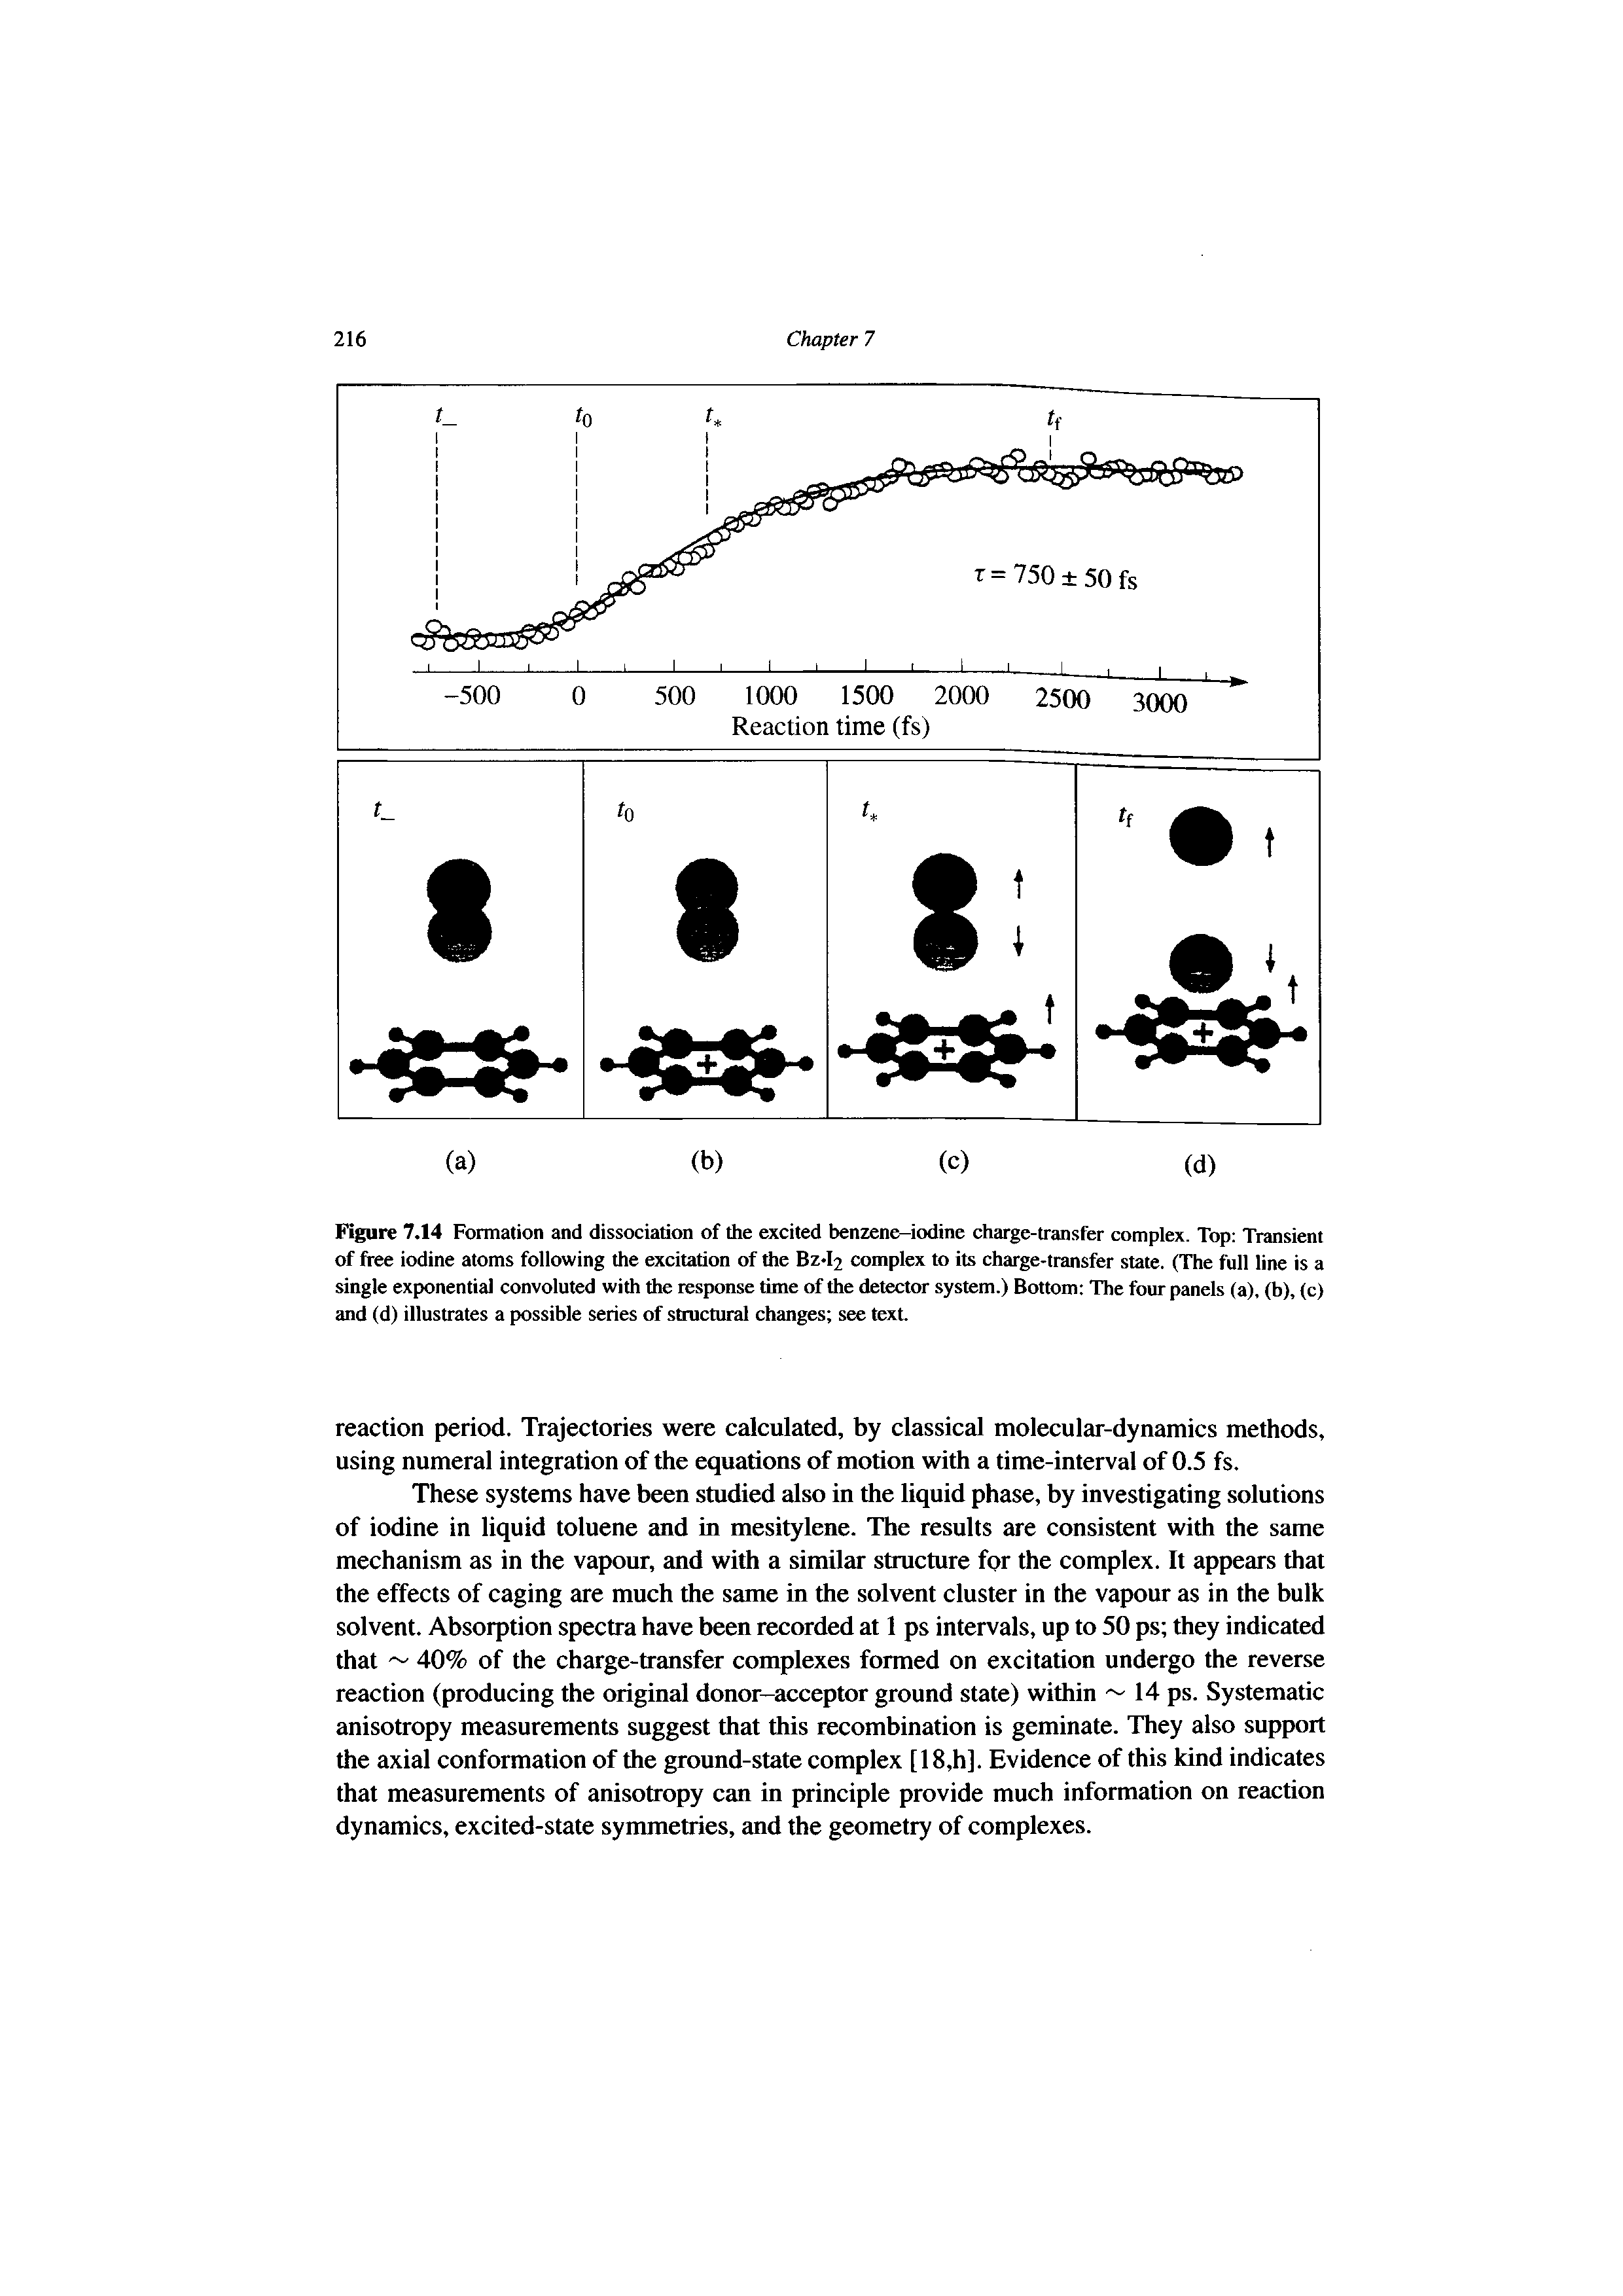 Figure 7.14 Formation and dissociation of the excited benzene-iodine charge-transfer complex. Top Transient of free iodine atoms following the excitation of the Bz-l2 complex to its charge-transfer state. (The full line is a single exponential convoluted with the response time of the detector system.) Bottom The four panels (a), (b), (c) and (d) illustrates a possible series of structural changes see text...